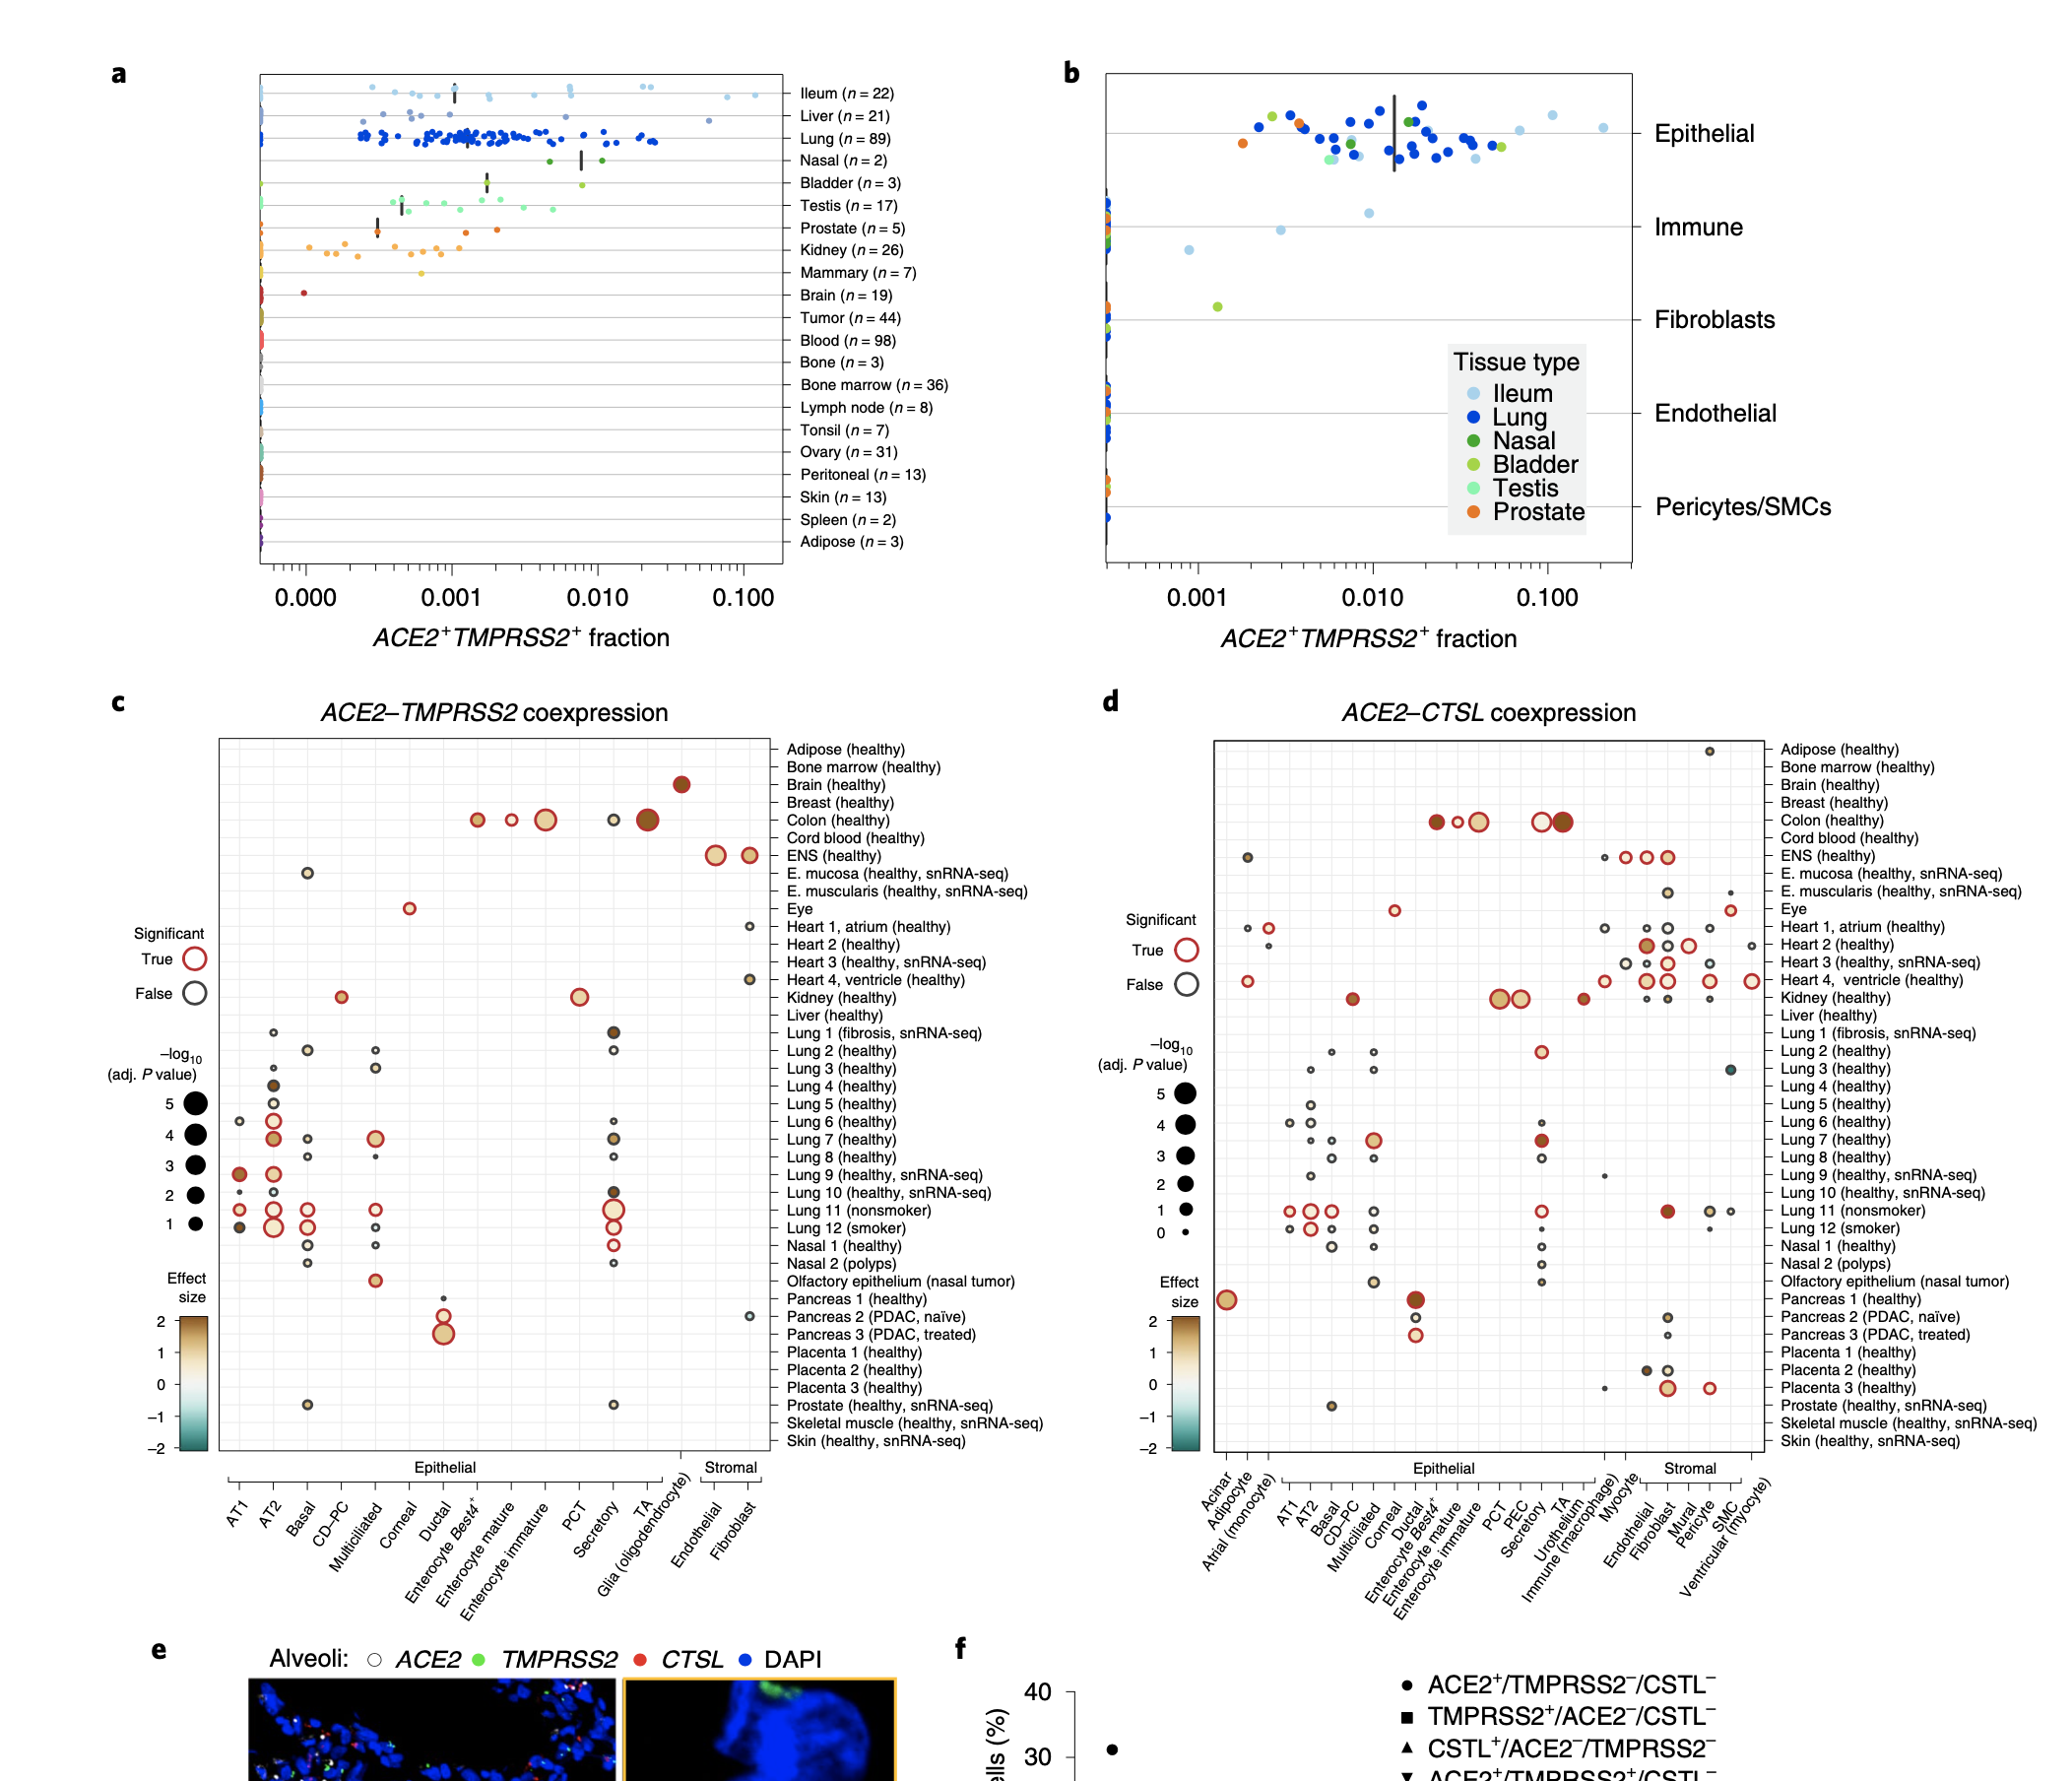 Single-cell meta-analysis of SARS-CoV-2 entry genes across tissues and demographics